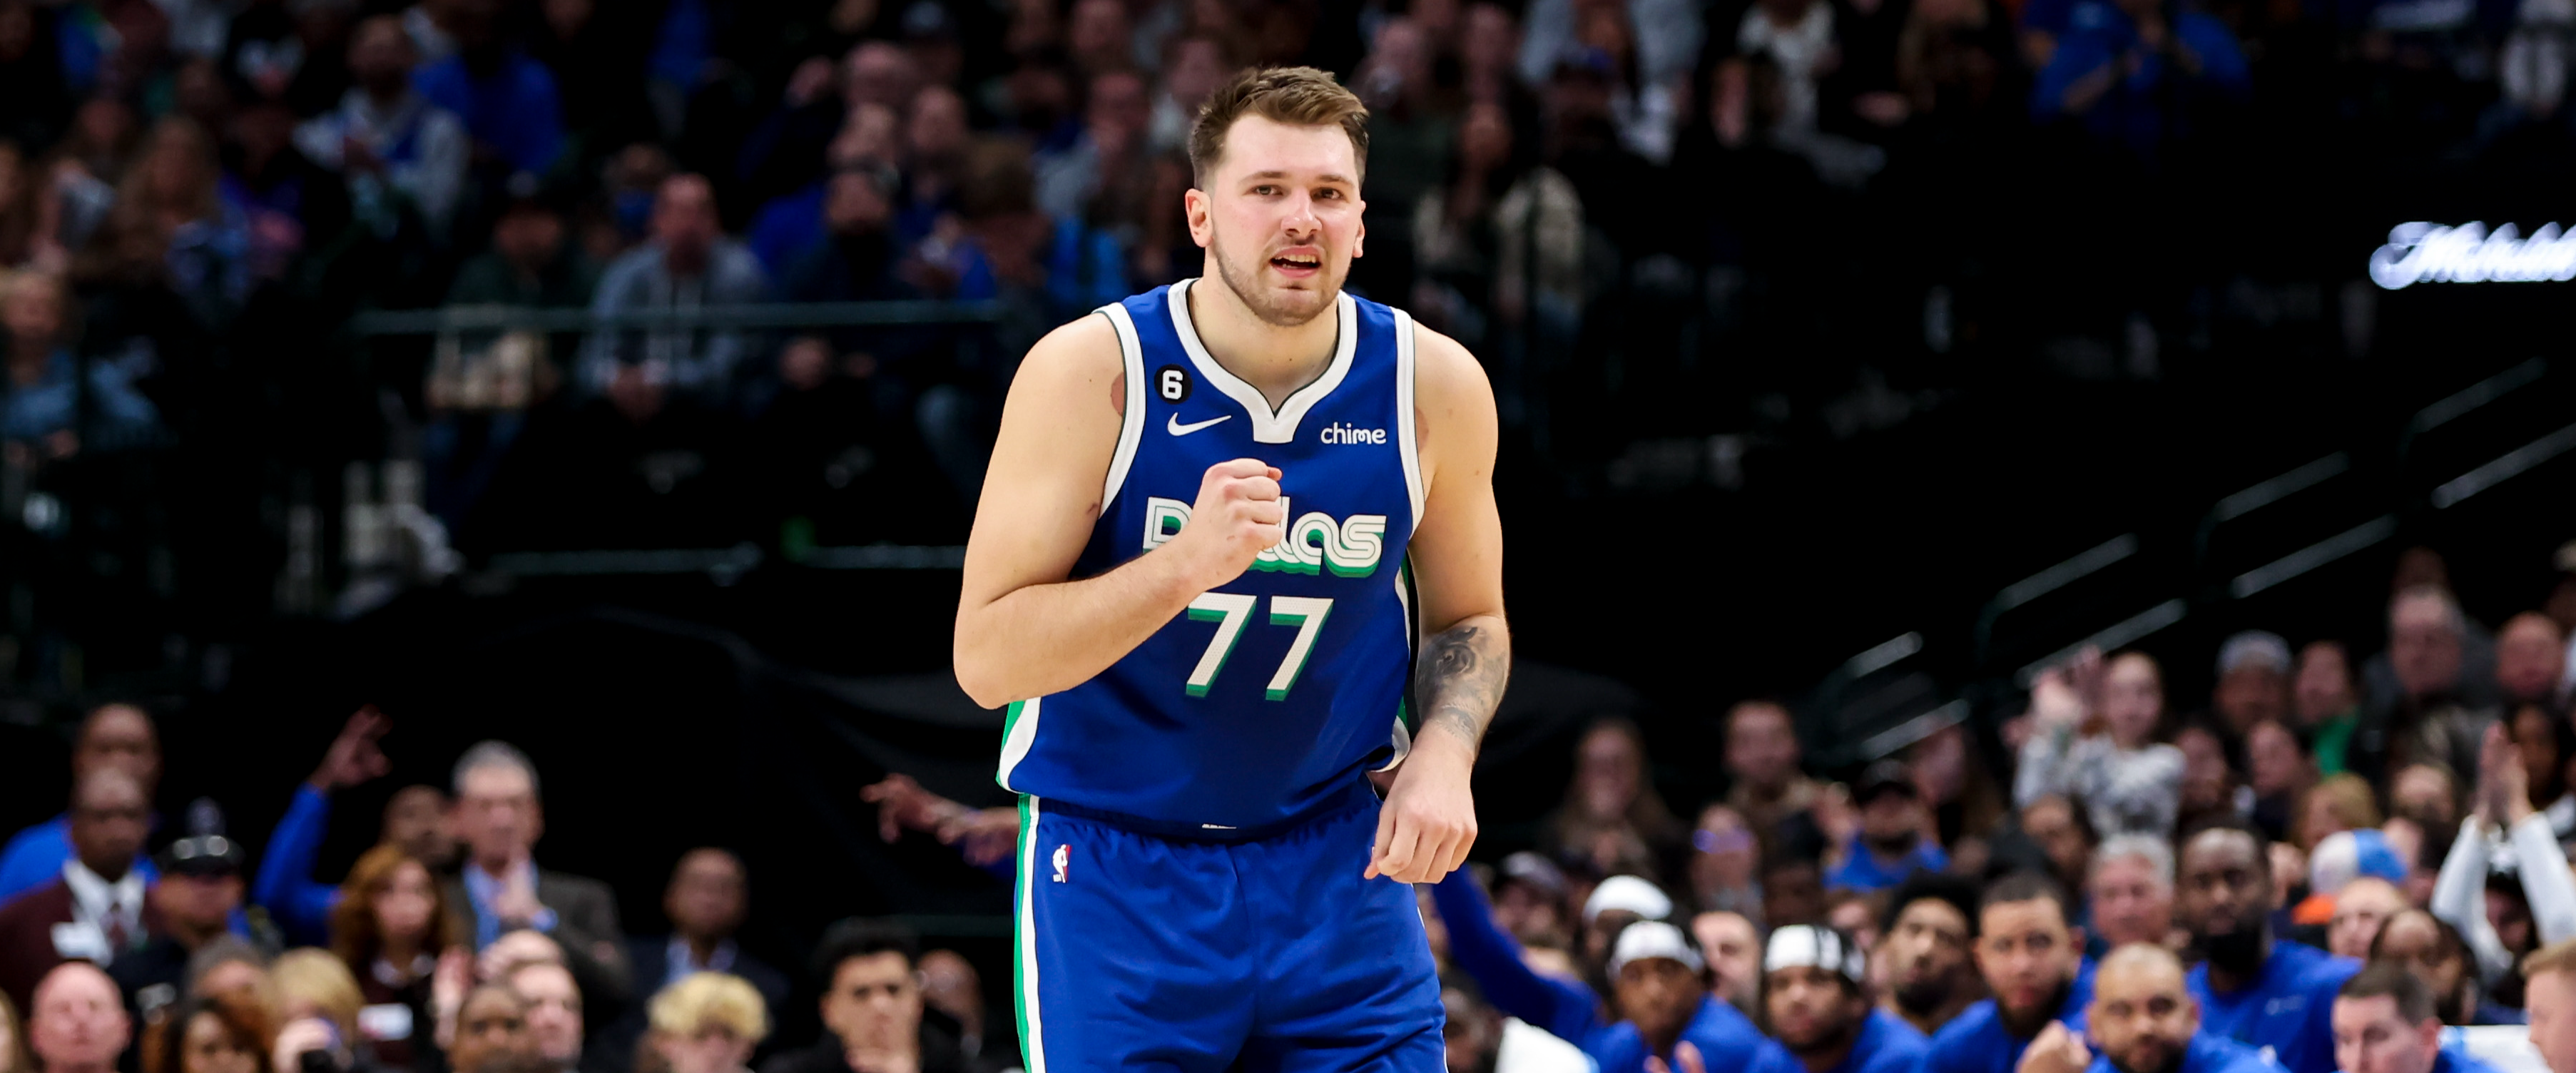 Luka Doncic is the clear favorite for NBA MVP